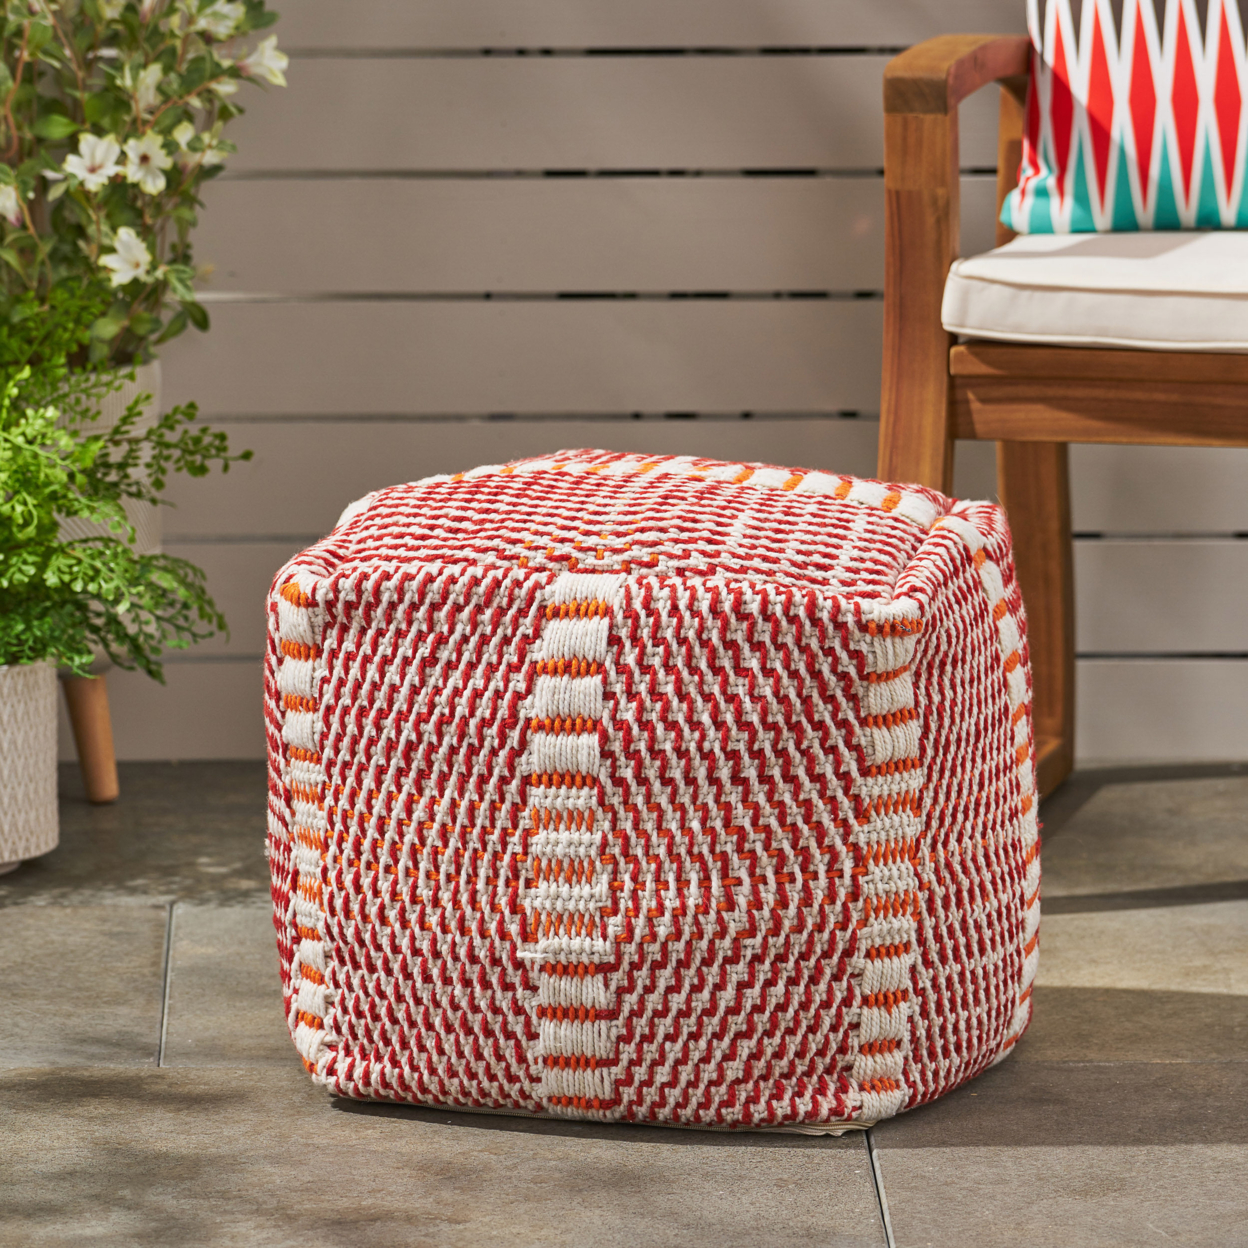 Dexter Bay Outdoor Handcrafted Boho Water Resistant Cube Pouf, Red and Orange - image 2 of 5